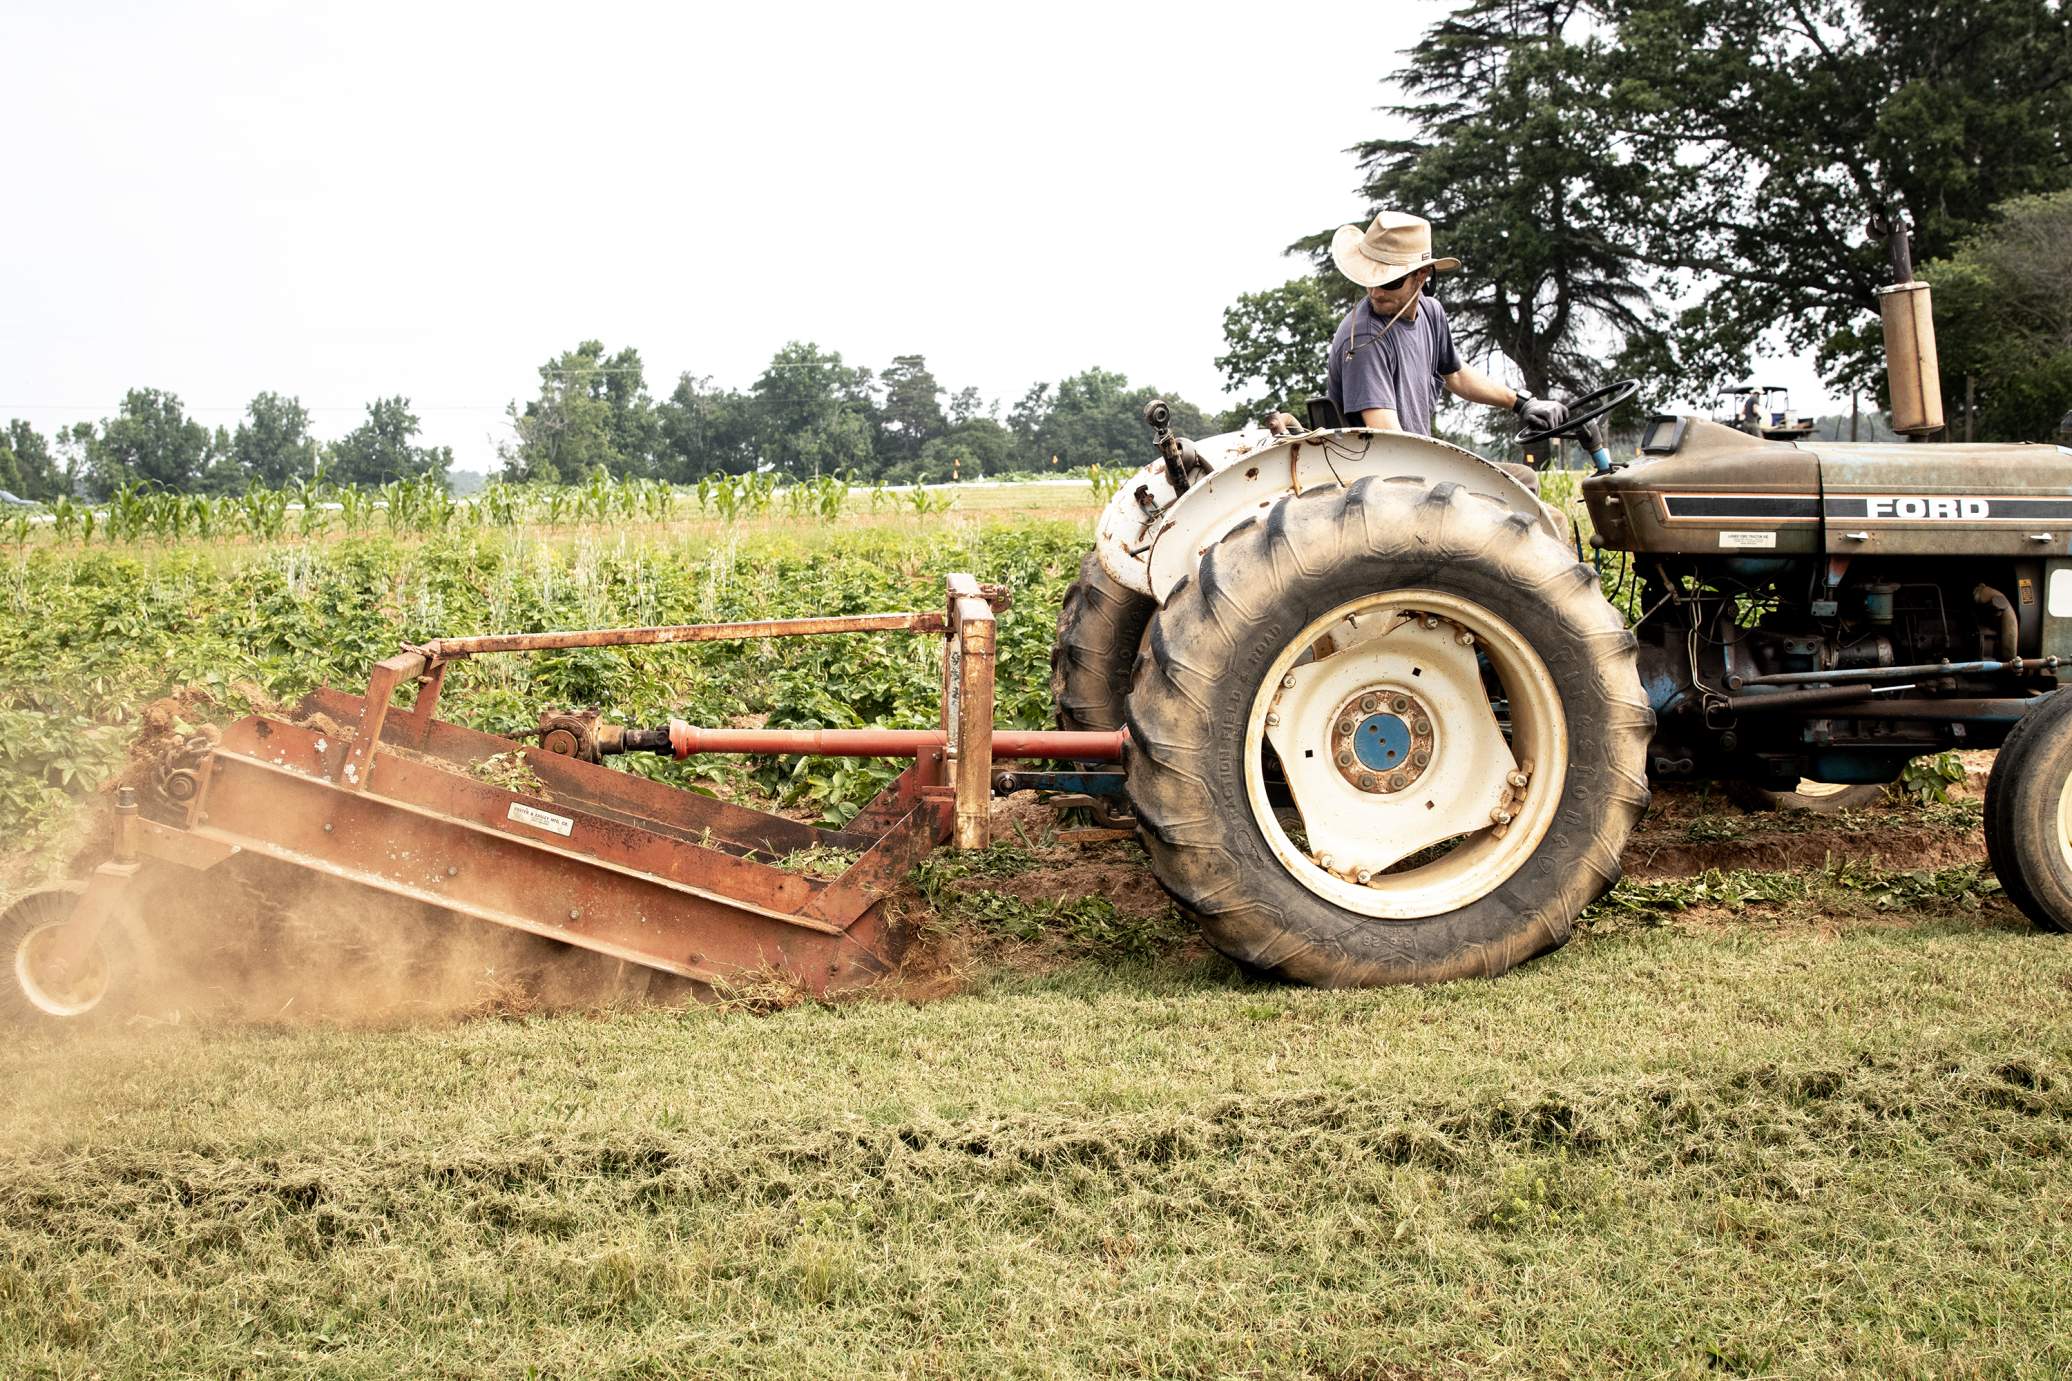 UGA Experimental Farm employees demonstrate how potatoes are picked with a special attachment.